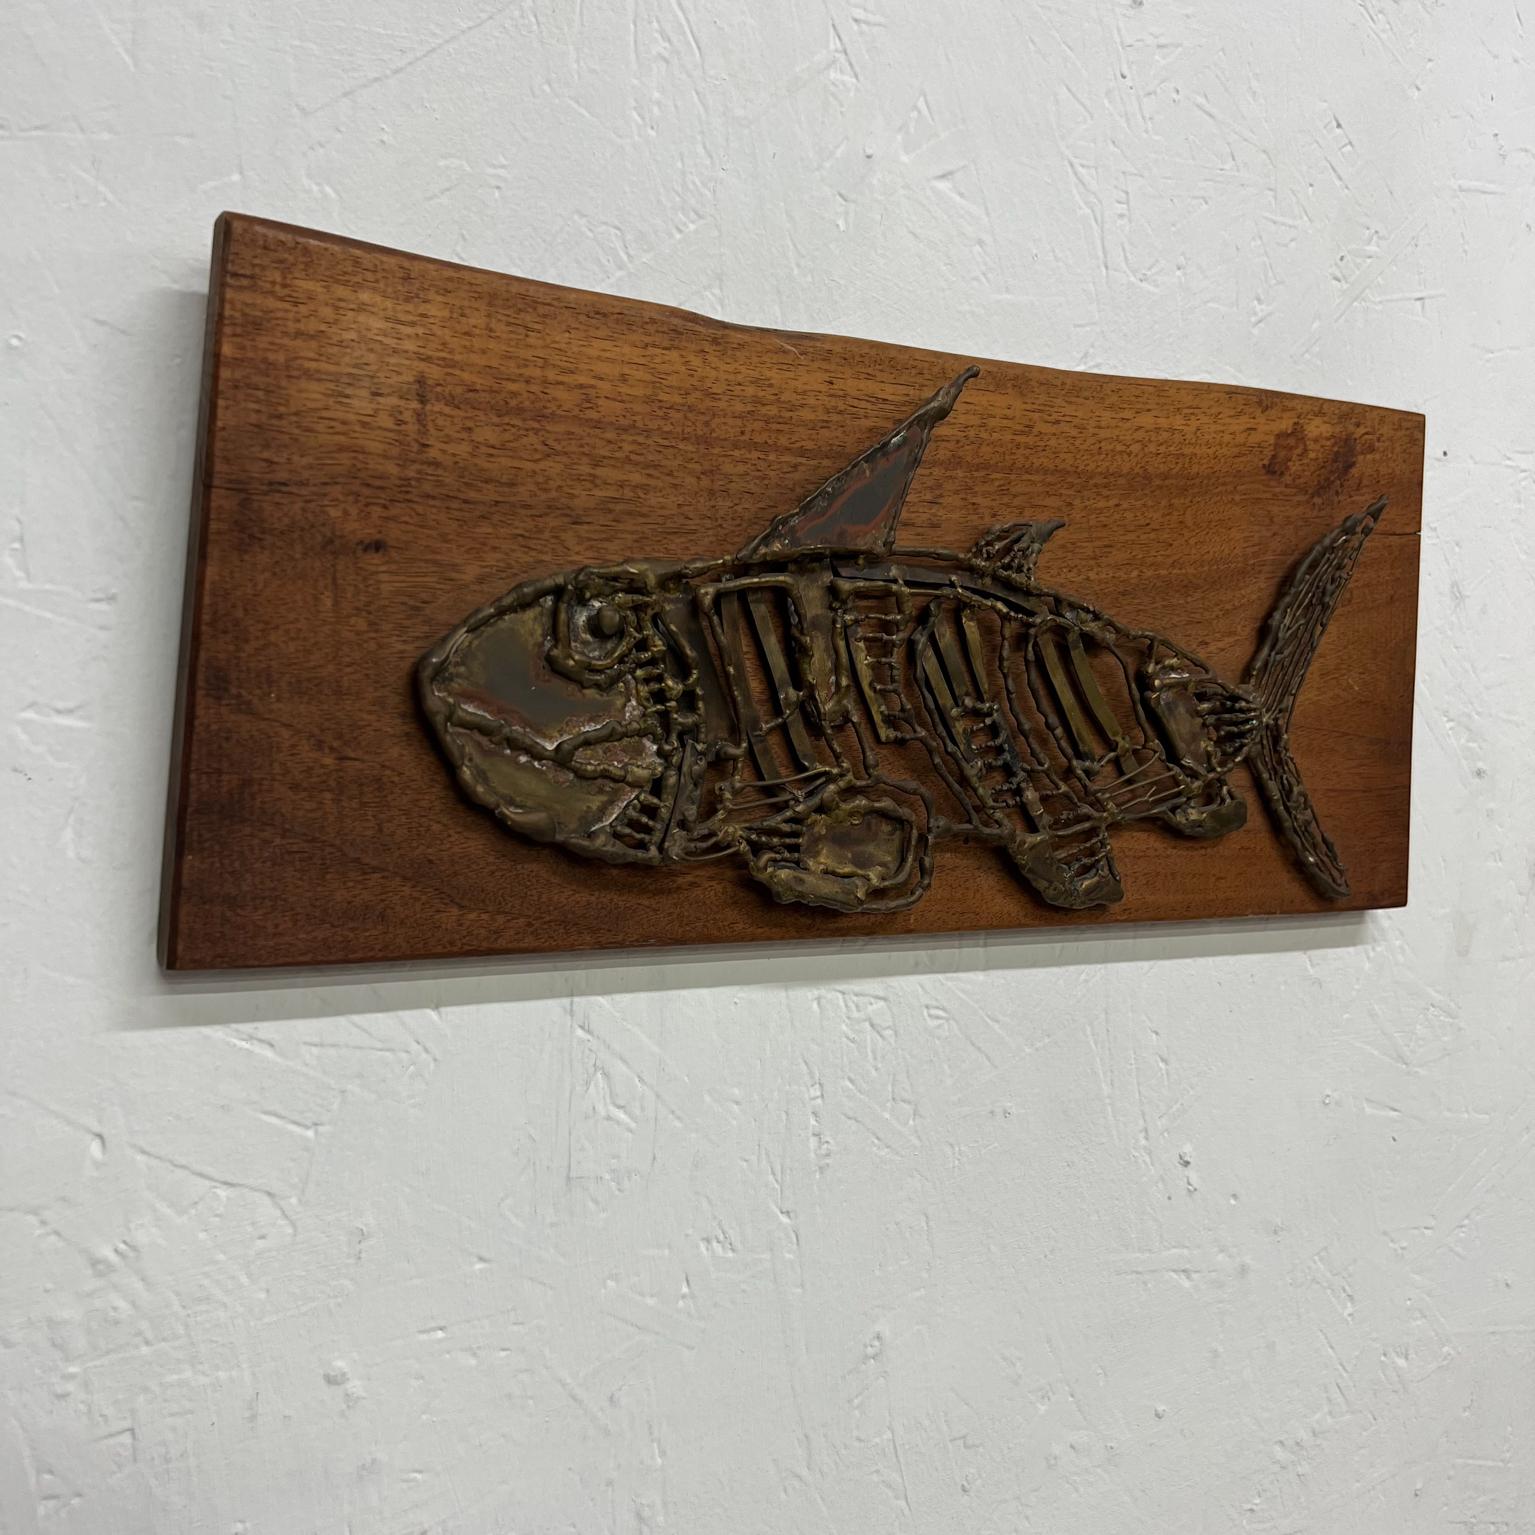 1970s Modern Brutalist Wall Art Bronzed Metal Fish on Wood Plaque For Sale 1